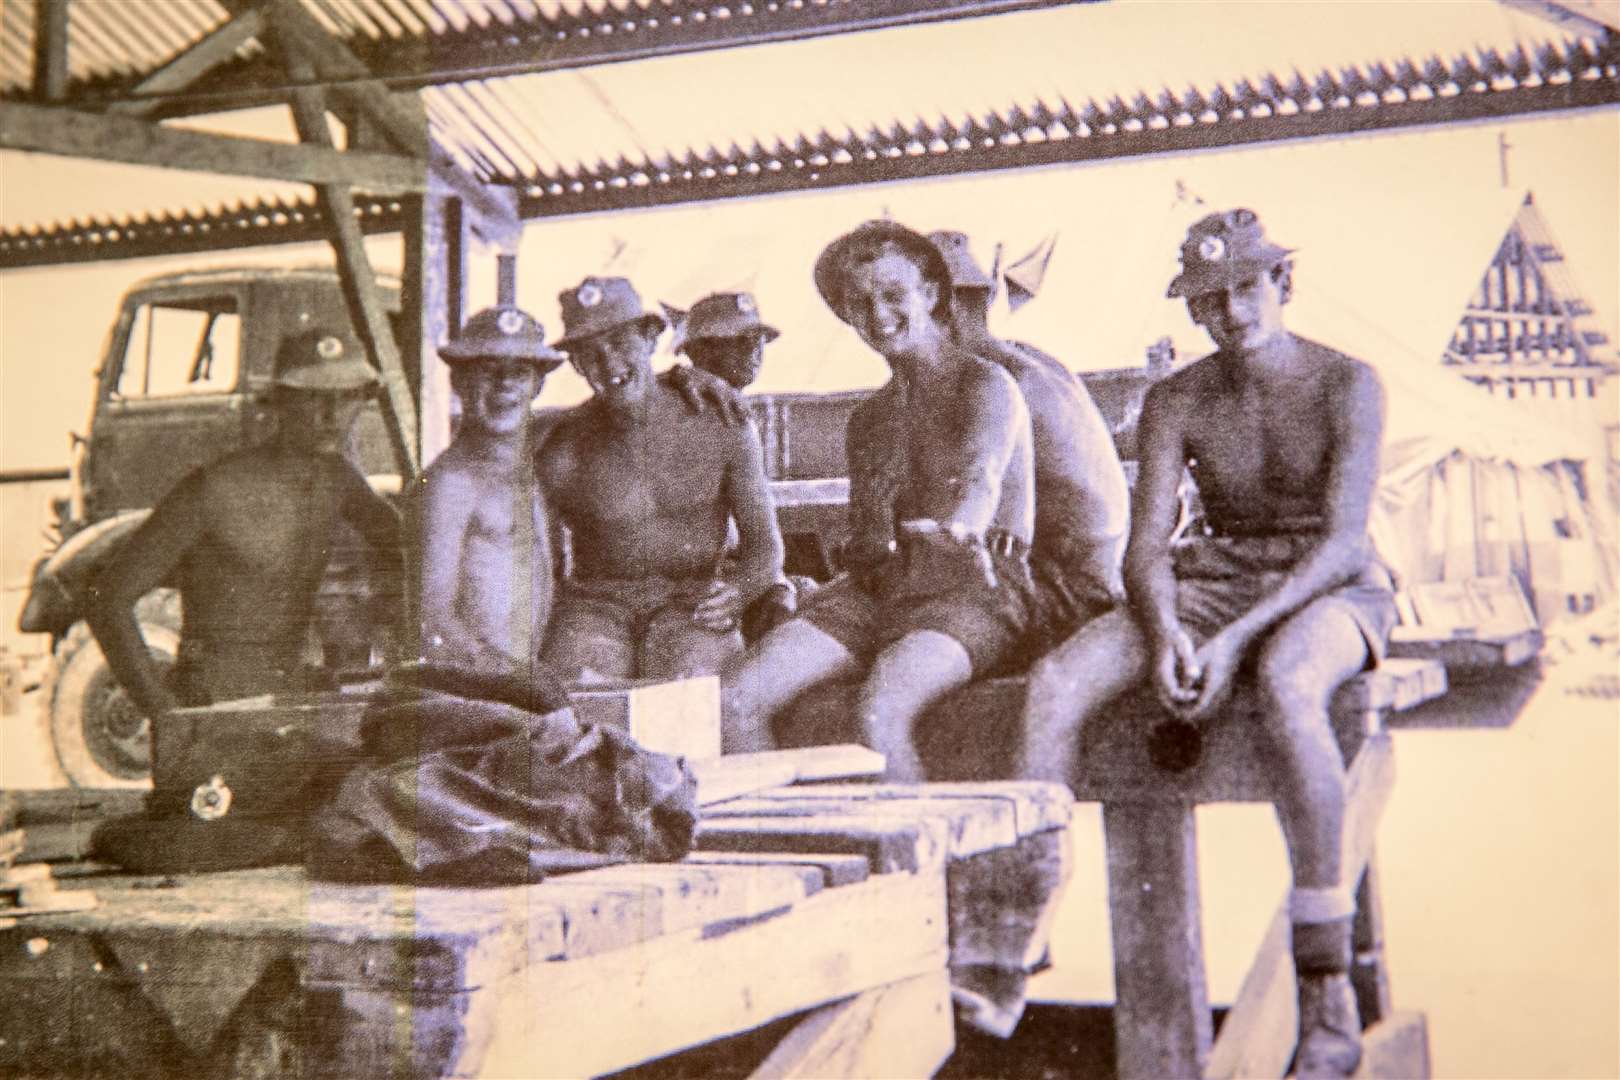 Terry Quinlan (second from left) on Christmas Island in 1958